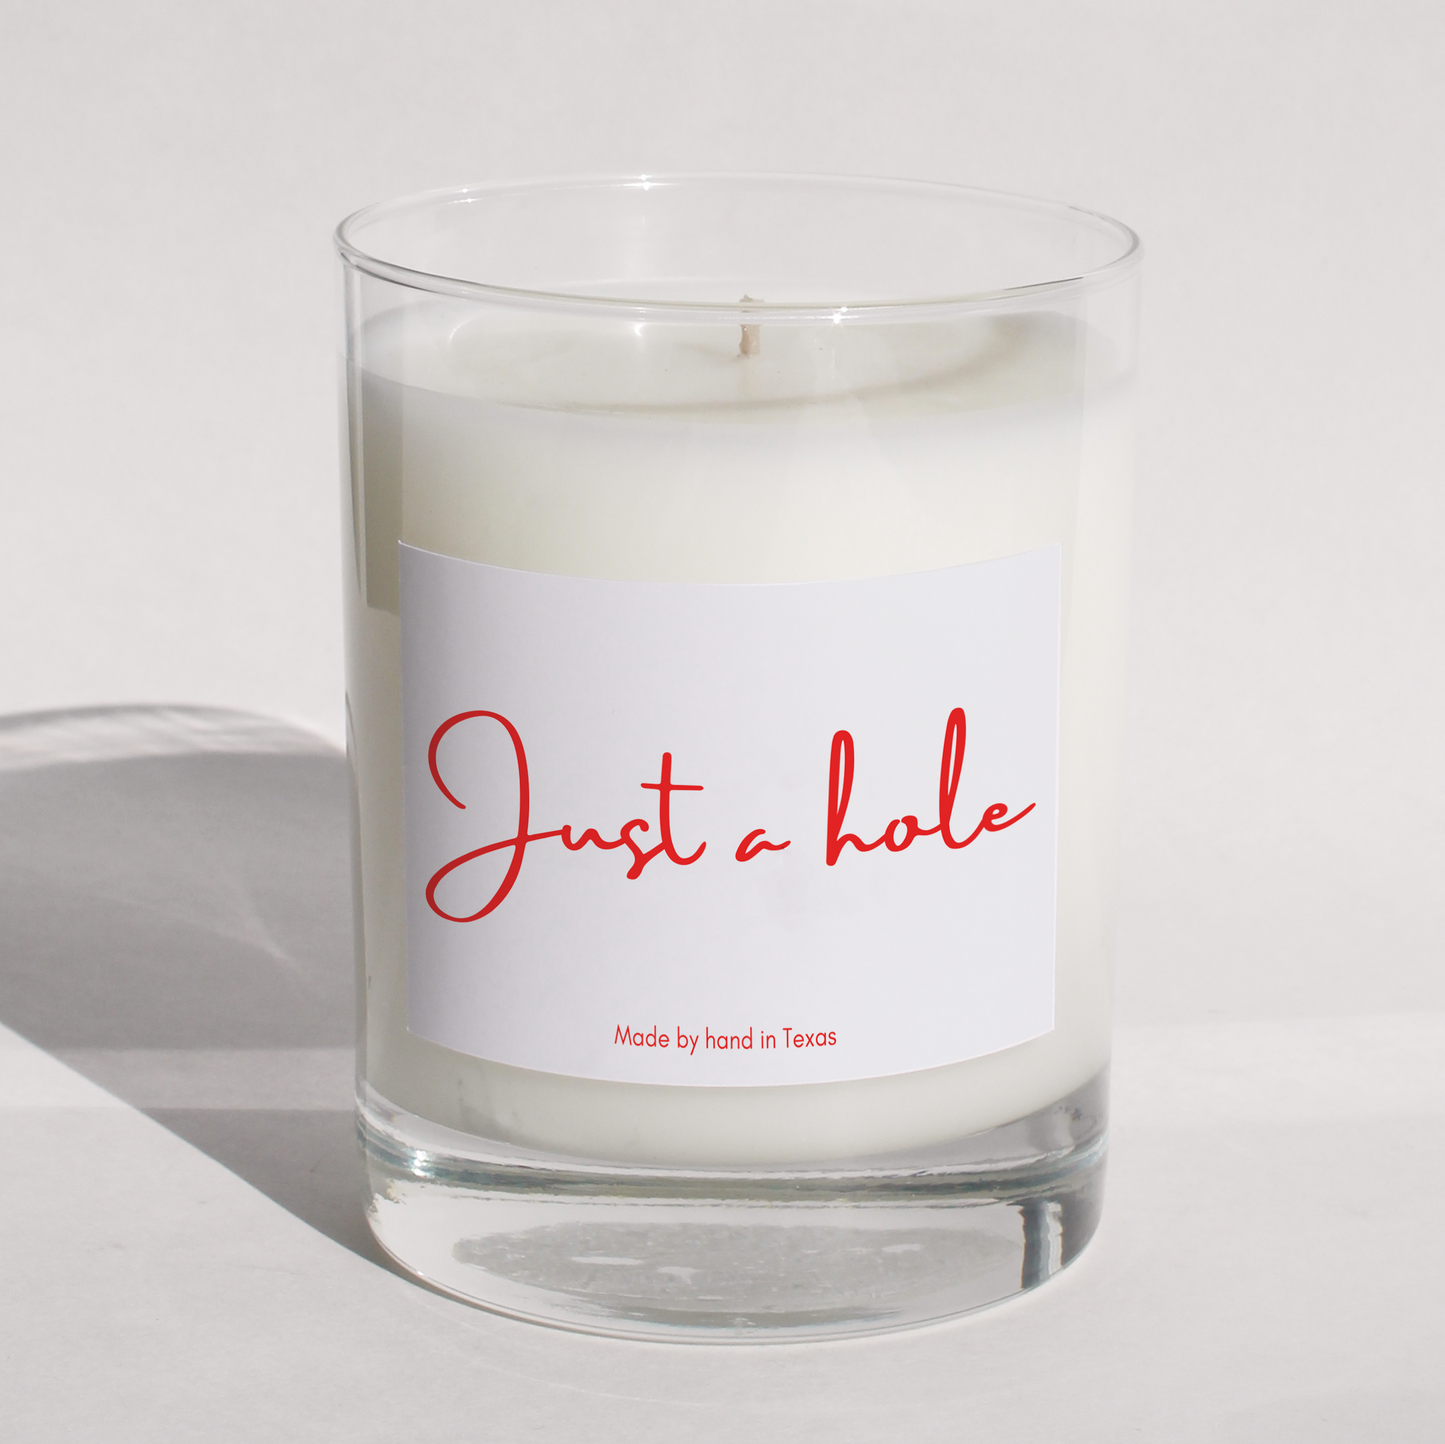 Just a hole - Naughty Candle